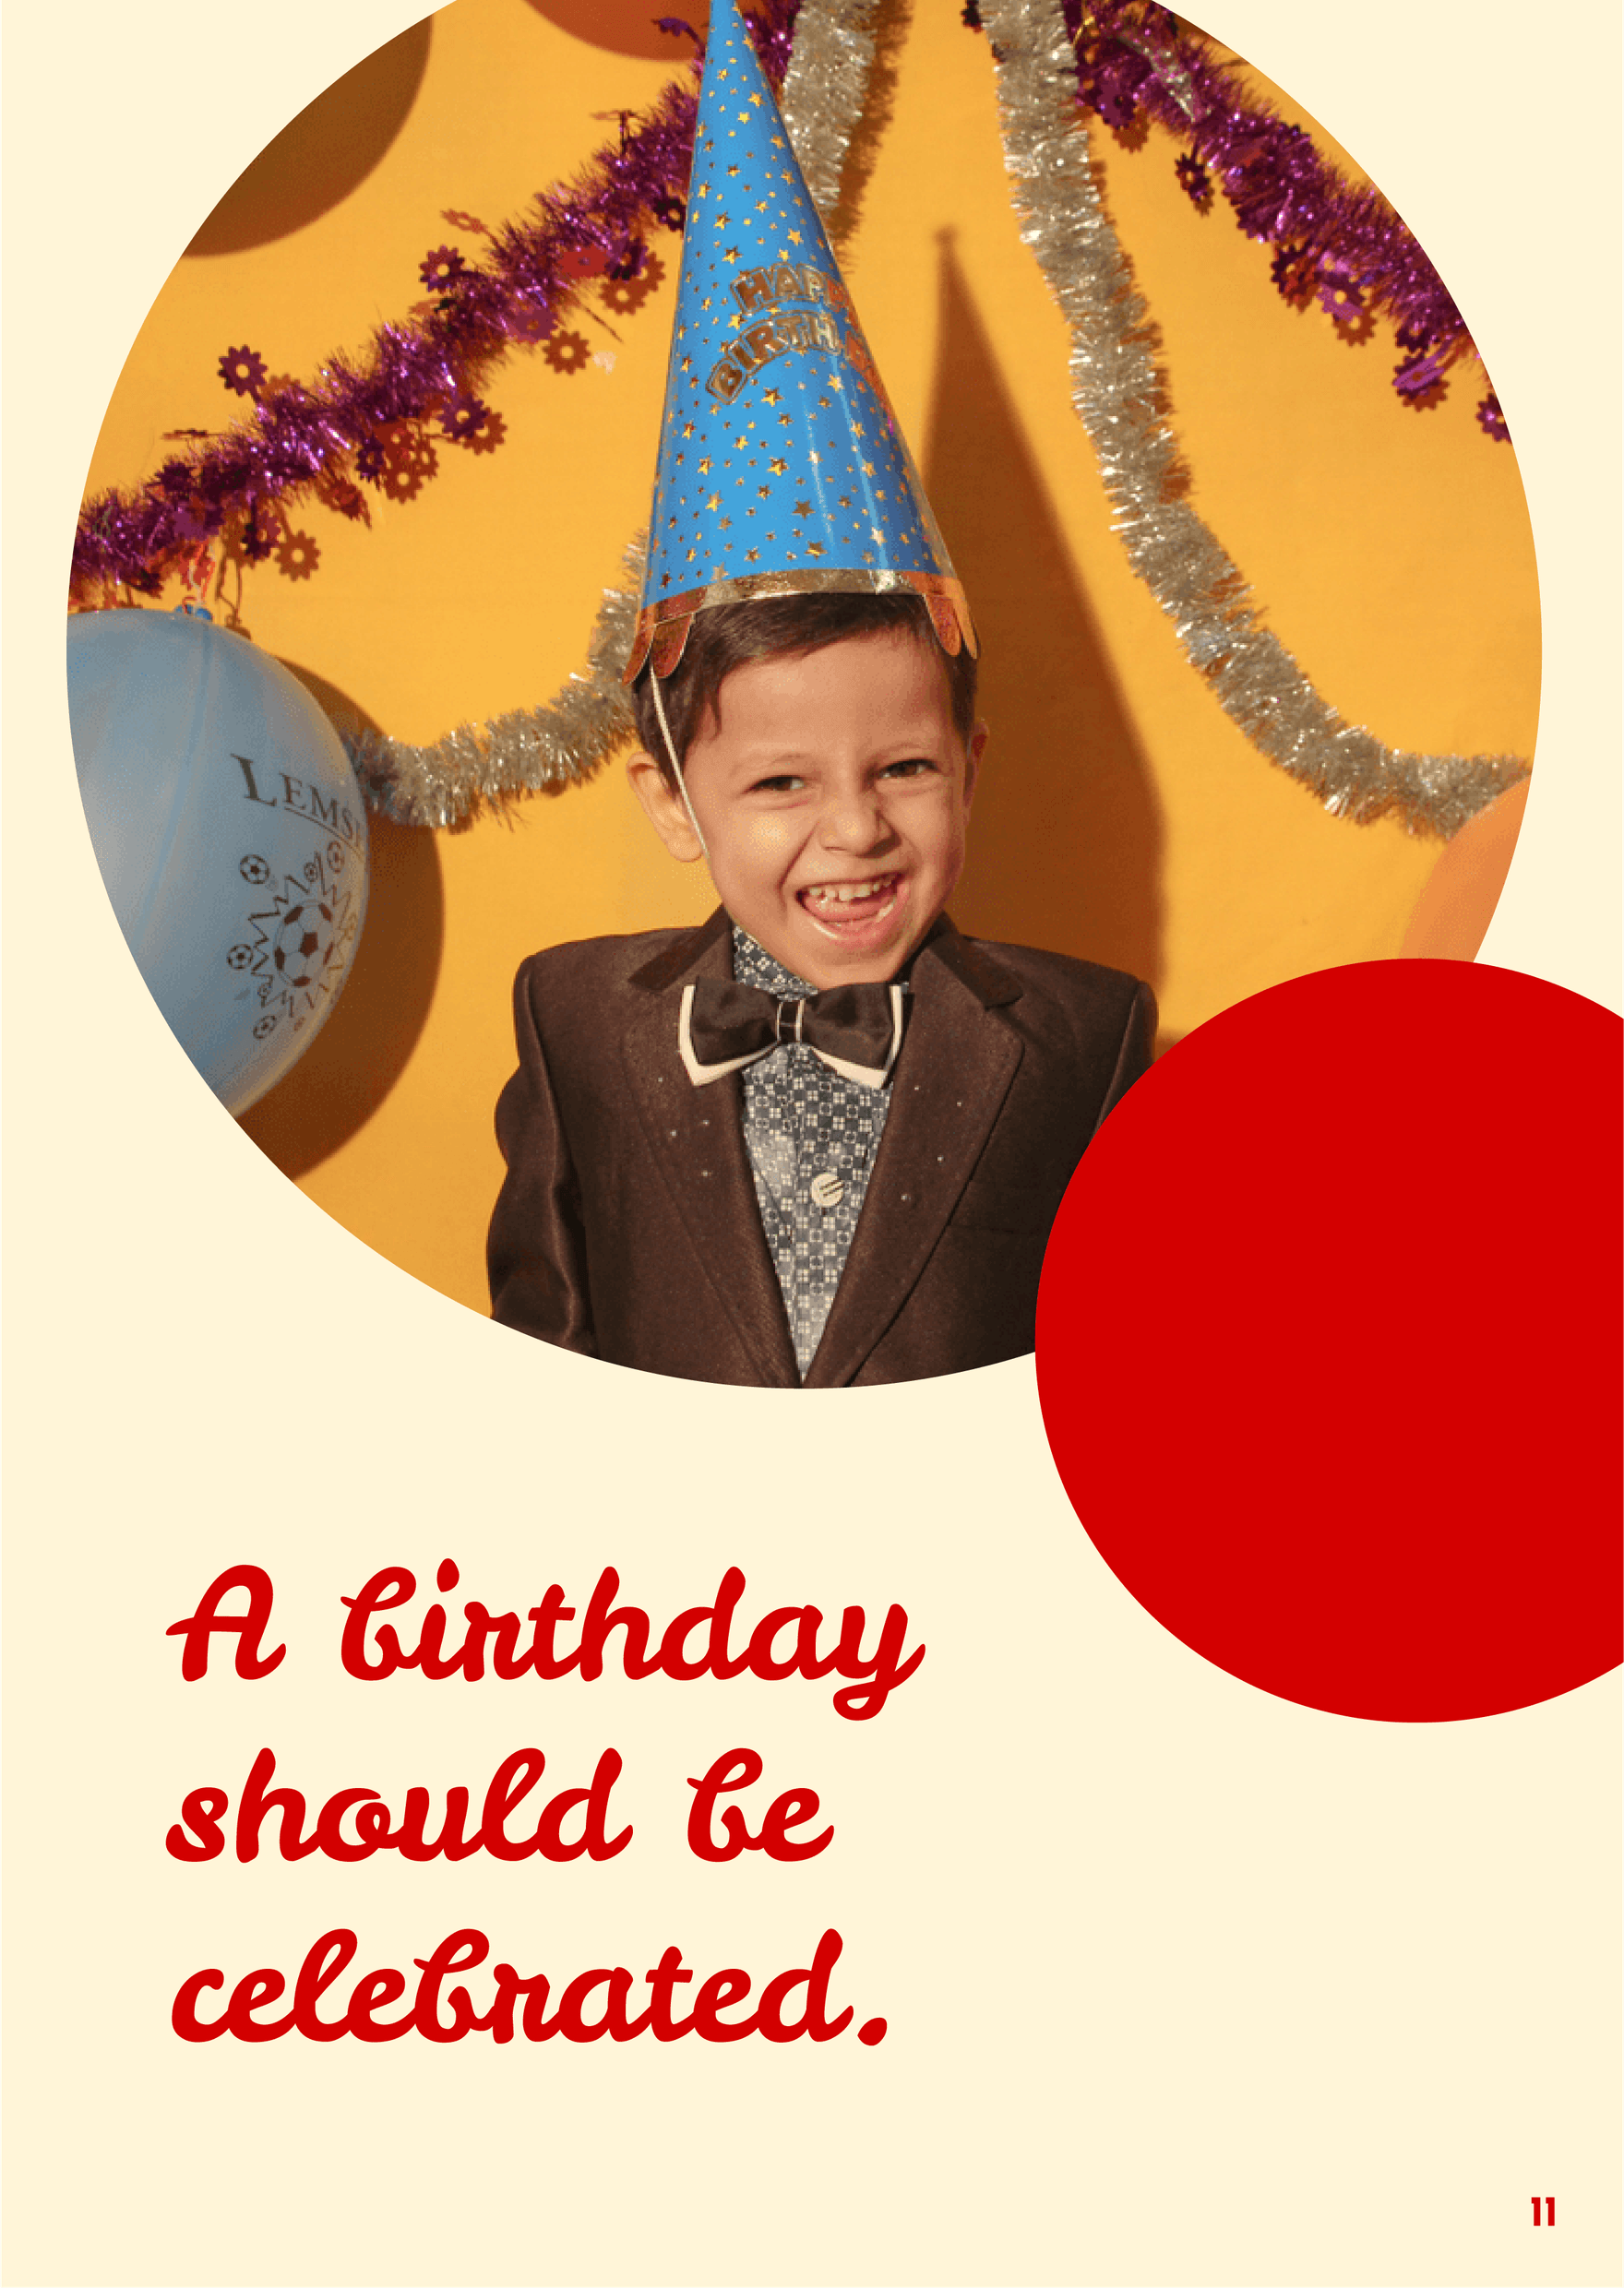 Birthday Booklet Template